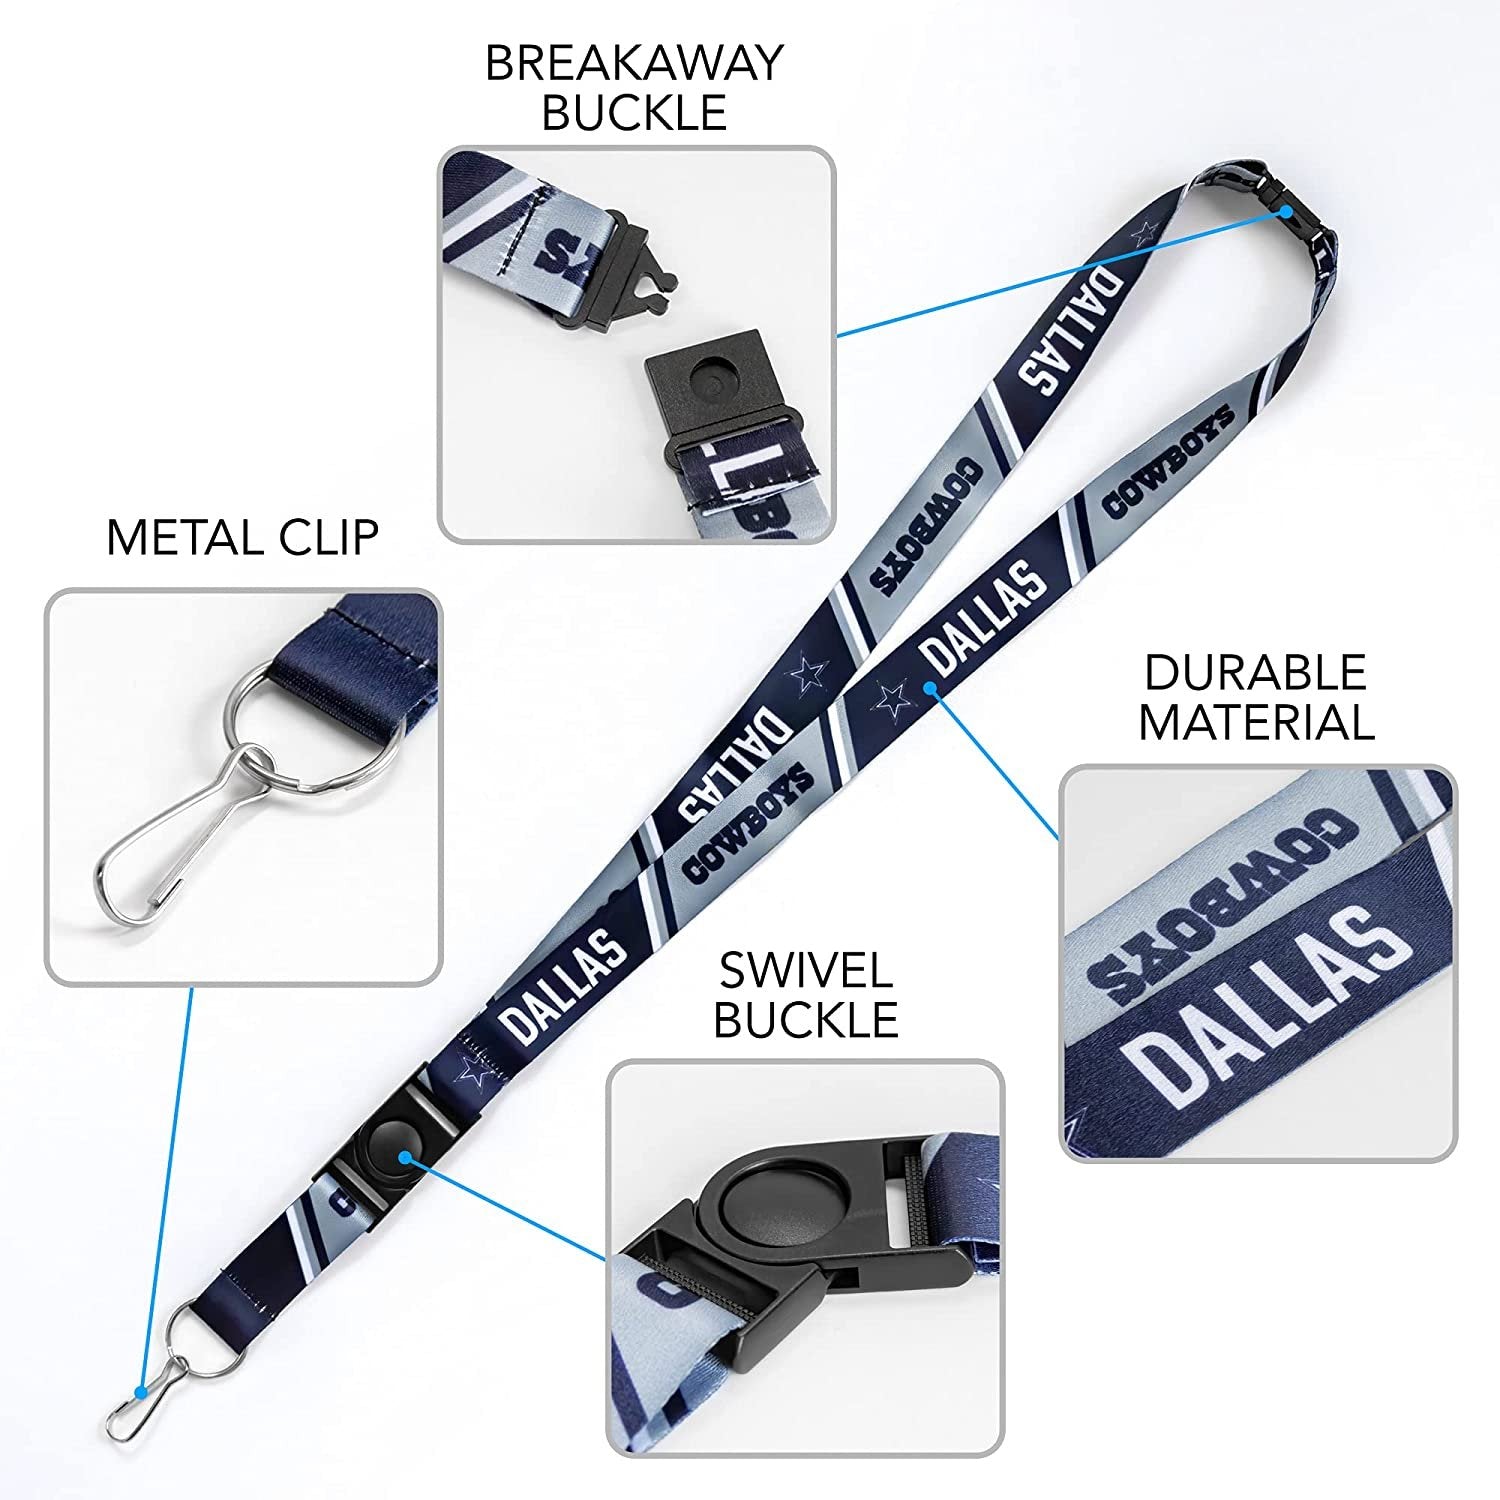 Brigham Young University Cougars BYU Wolfpack Lanyard Keychain Double Sided 18 Inch Button Clip Safety Breakaway